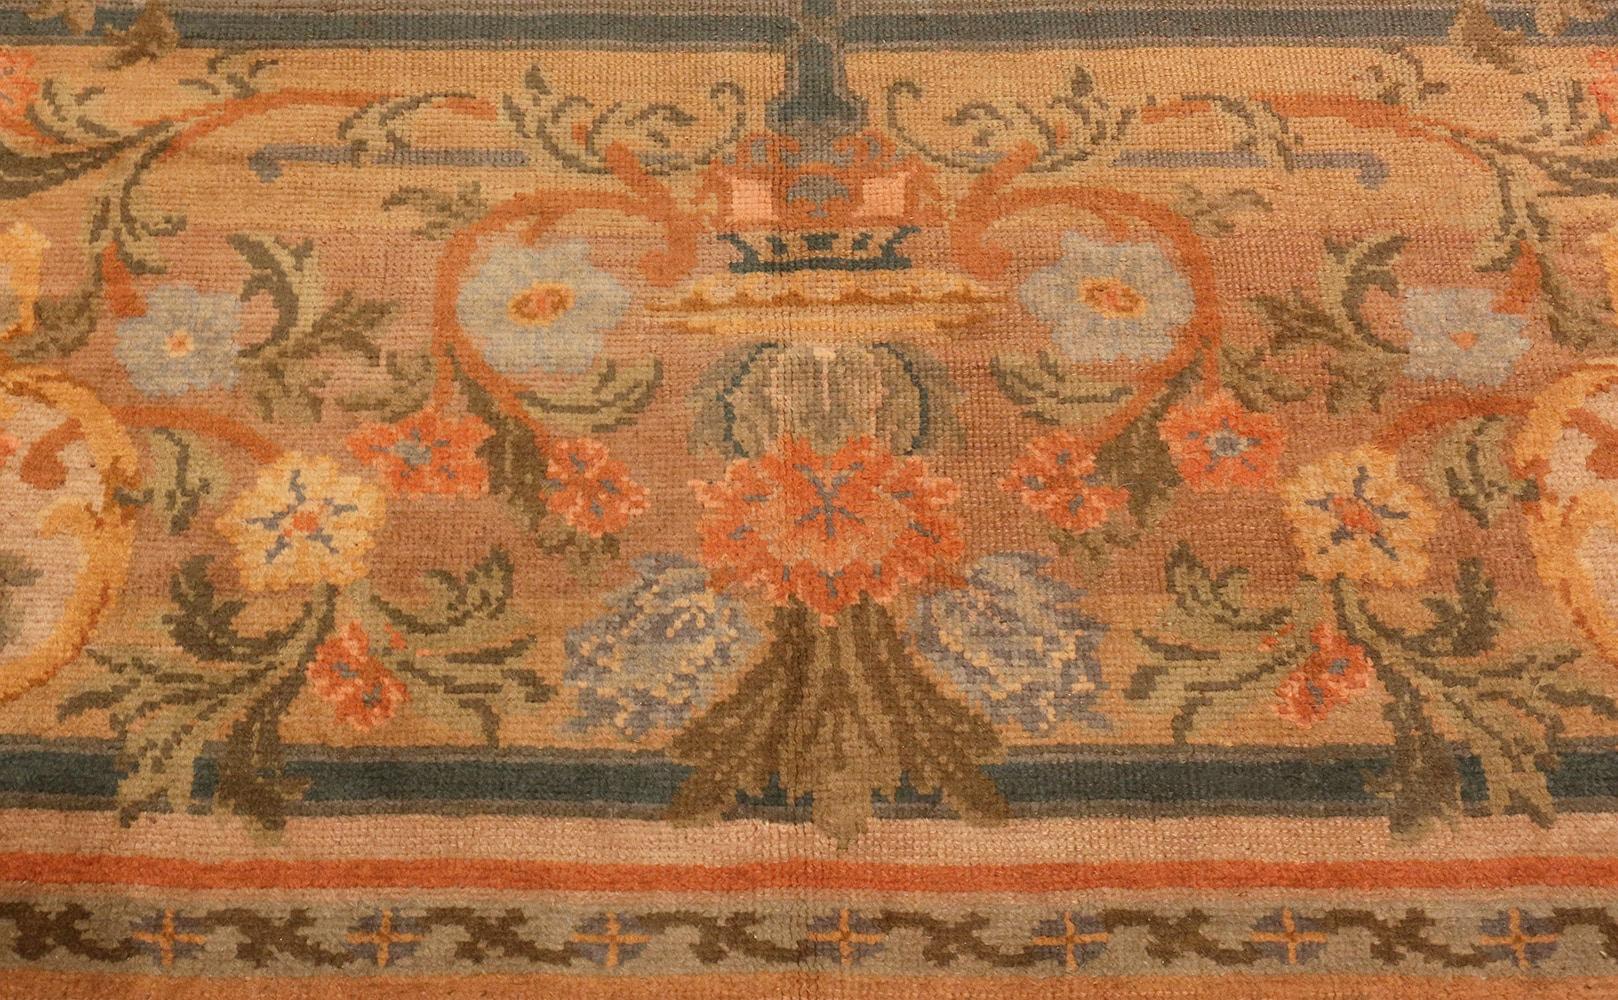 A breathtaking floral and grid design large size green background color antique Spanish Savonnerie carpet, country of origin / rug type: Antique Spanish rugs, circa early 20th century. Size: 15 ft 6 in x 19 ft (4.72 m x 5.79 m).
 